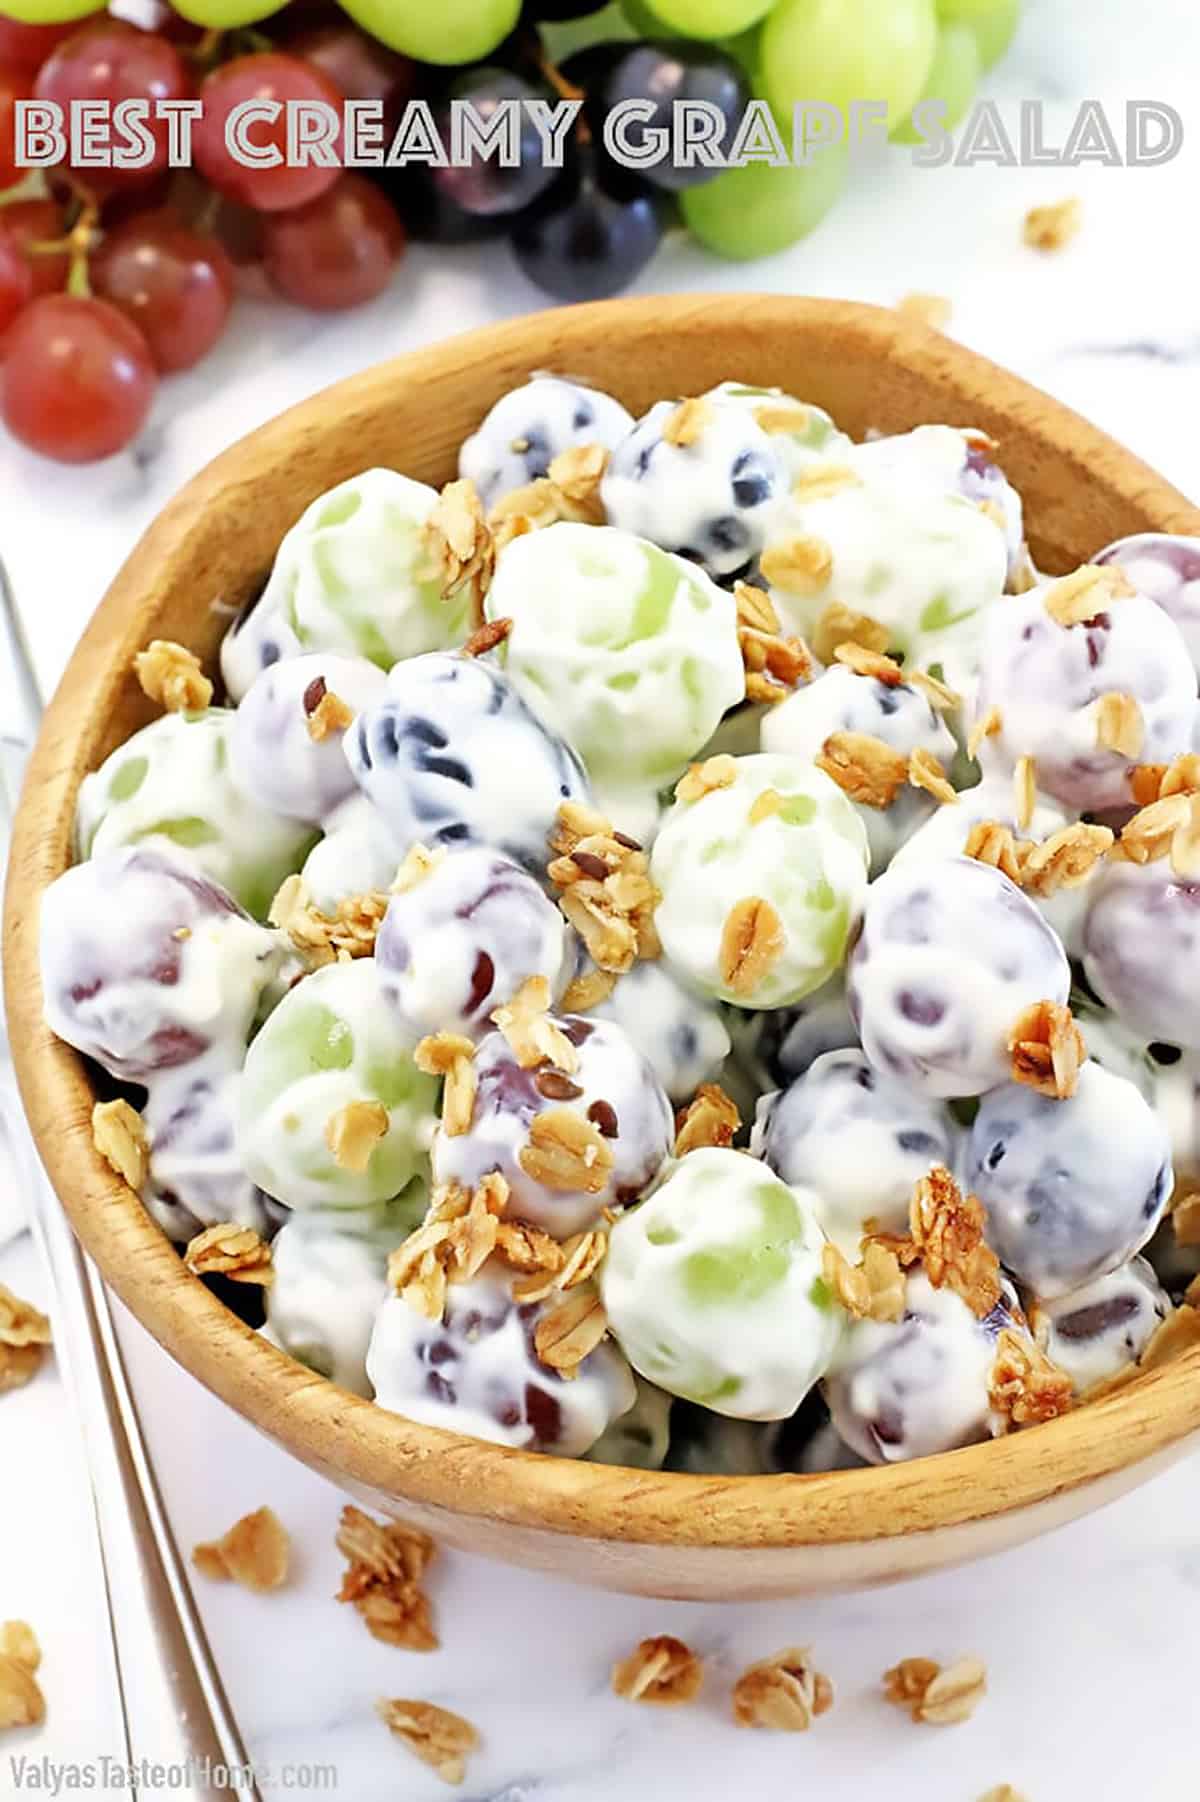 Best Creamy Grape Salad 1 This Best Creamy Grape Salad is a delicious blend of fresh juicy grapes in a creamy vanilla yogurt dressing, and a touch of sweet and sour is a perfect way to sweeten up a picnic, backyard family gathering, or any summer occasion.